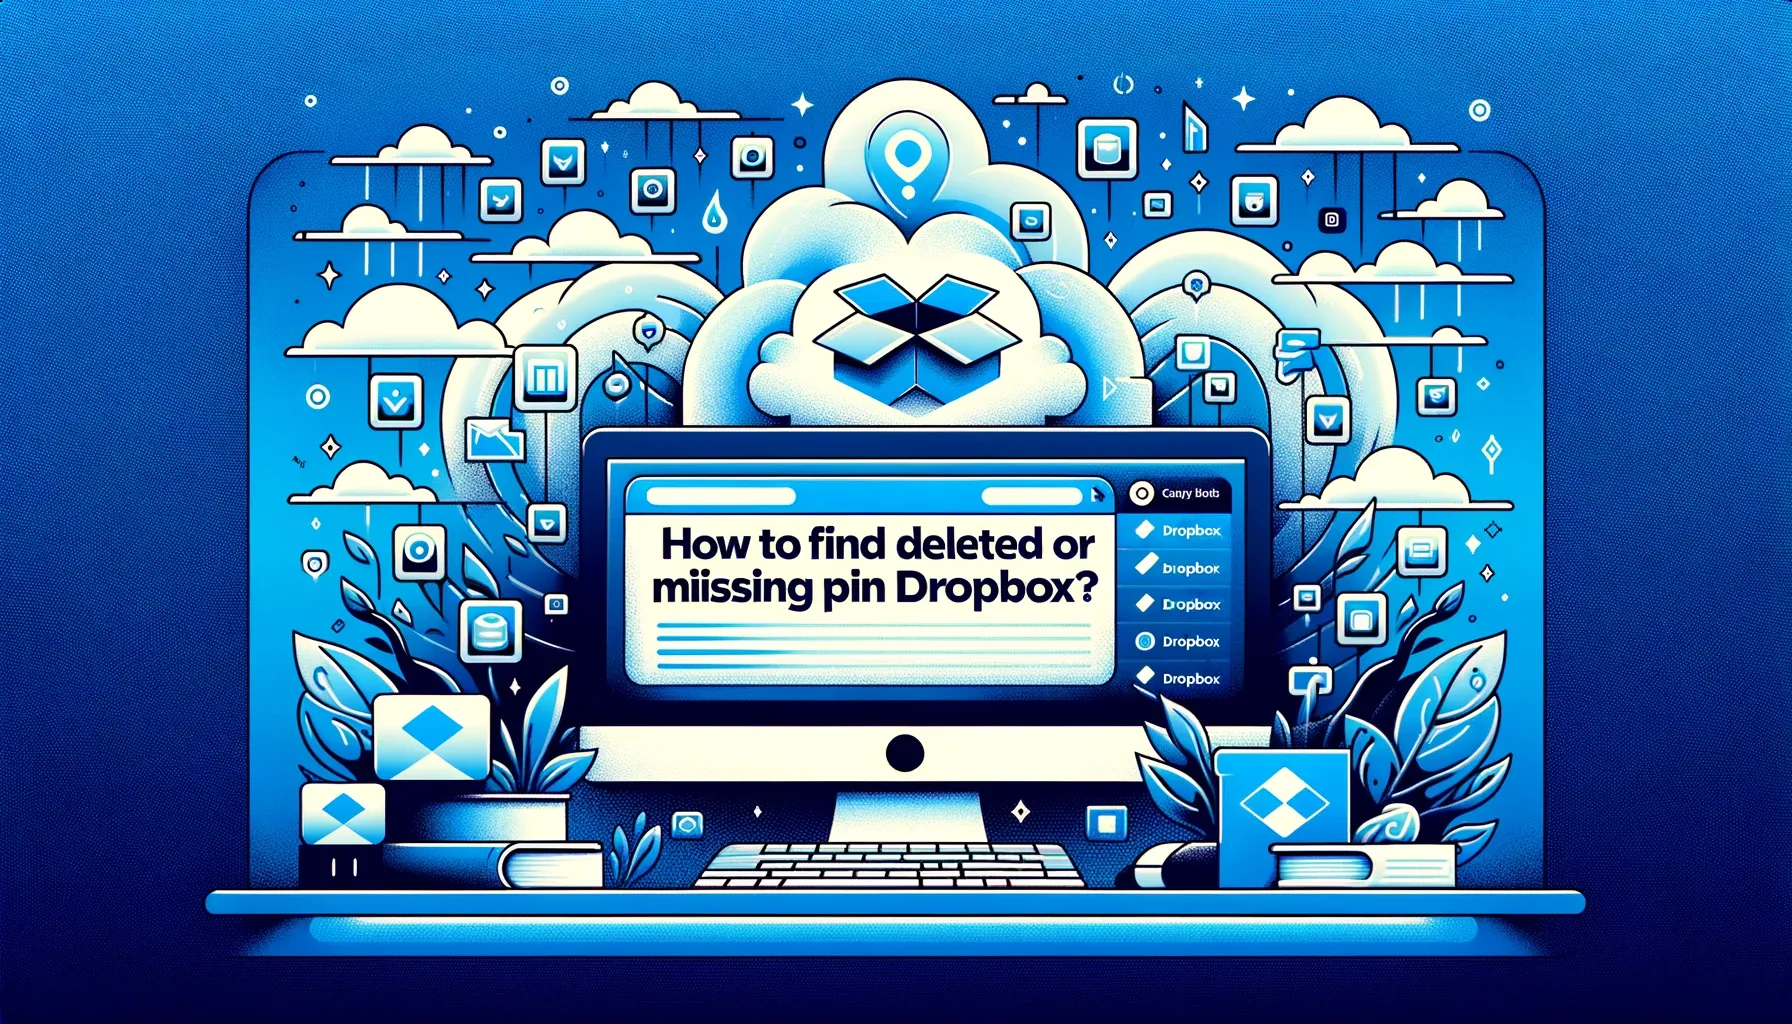 How to Find Deleted or Missing Photos in Dropbox